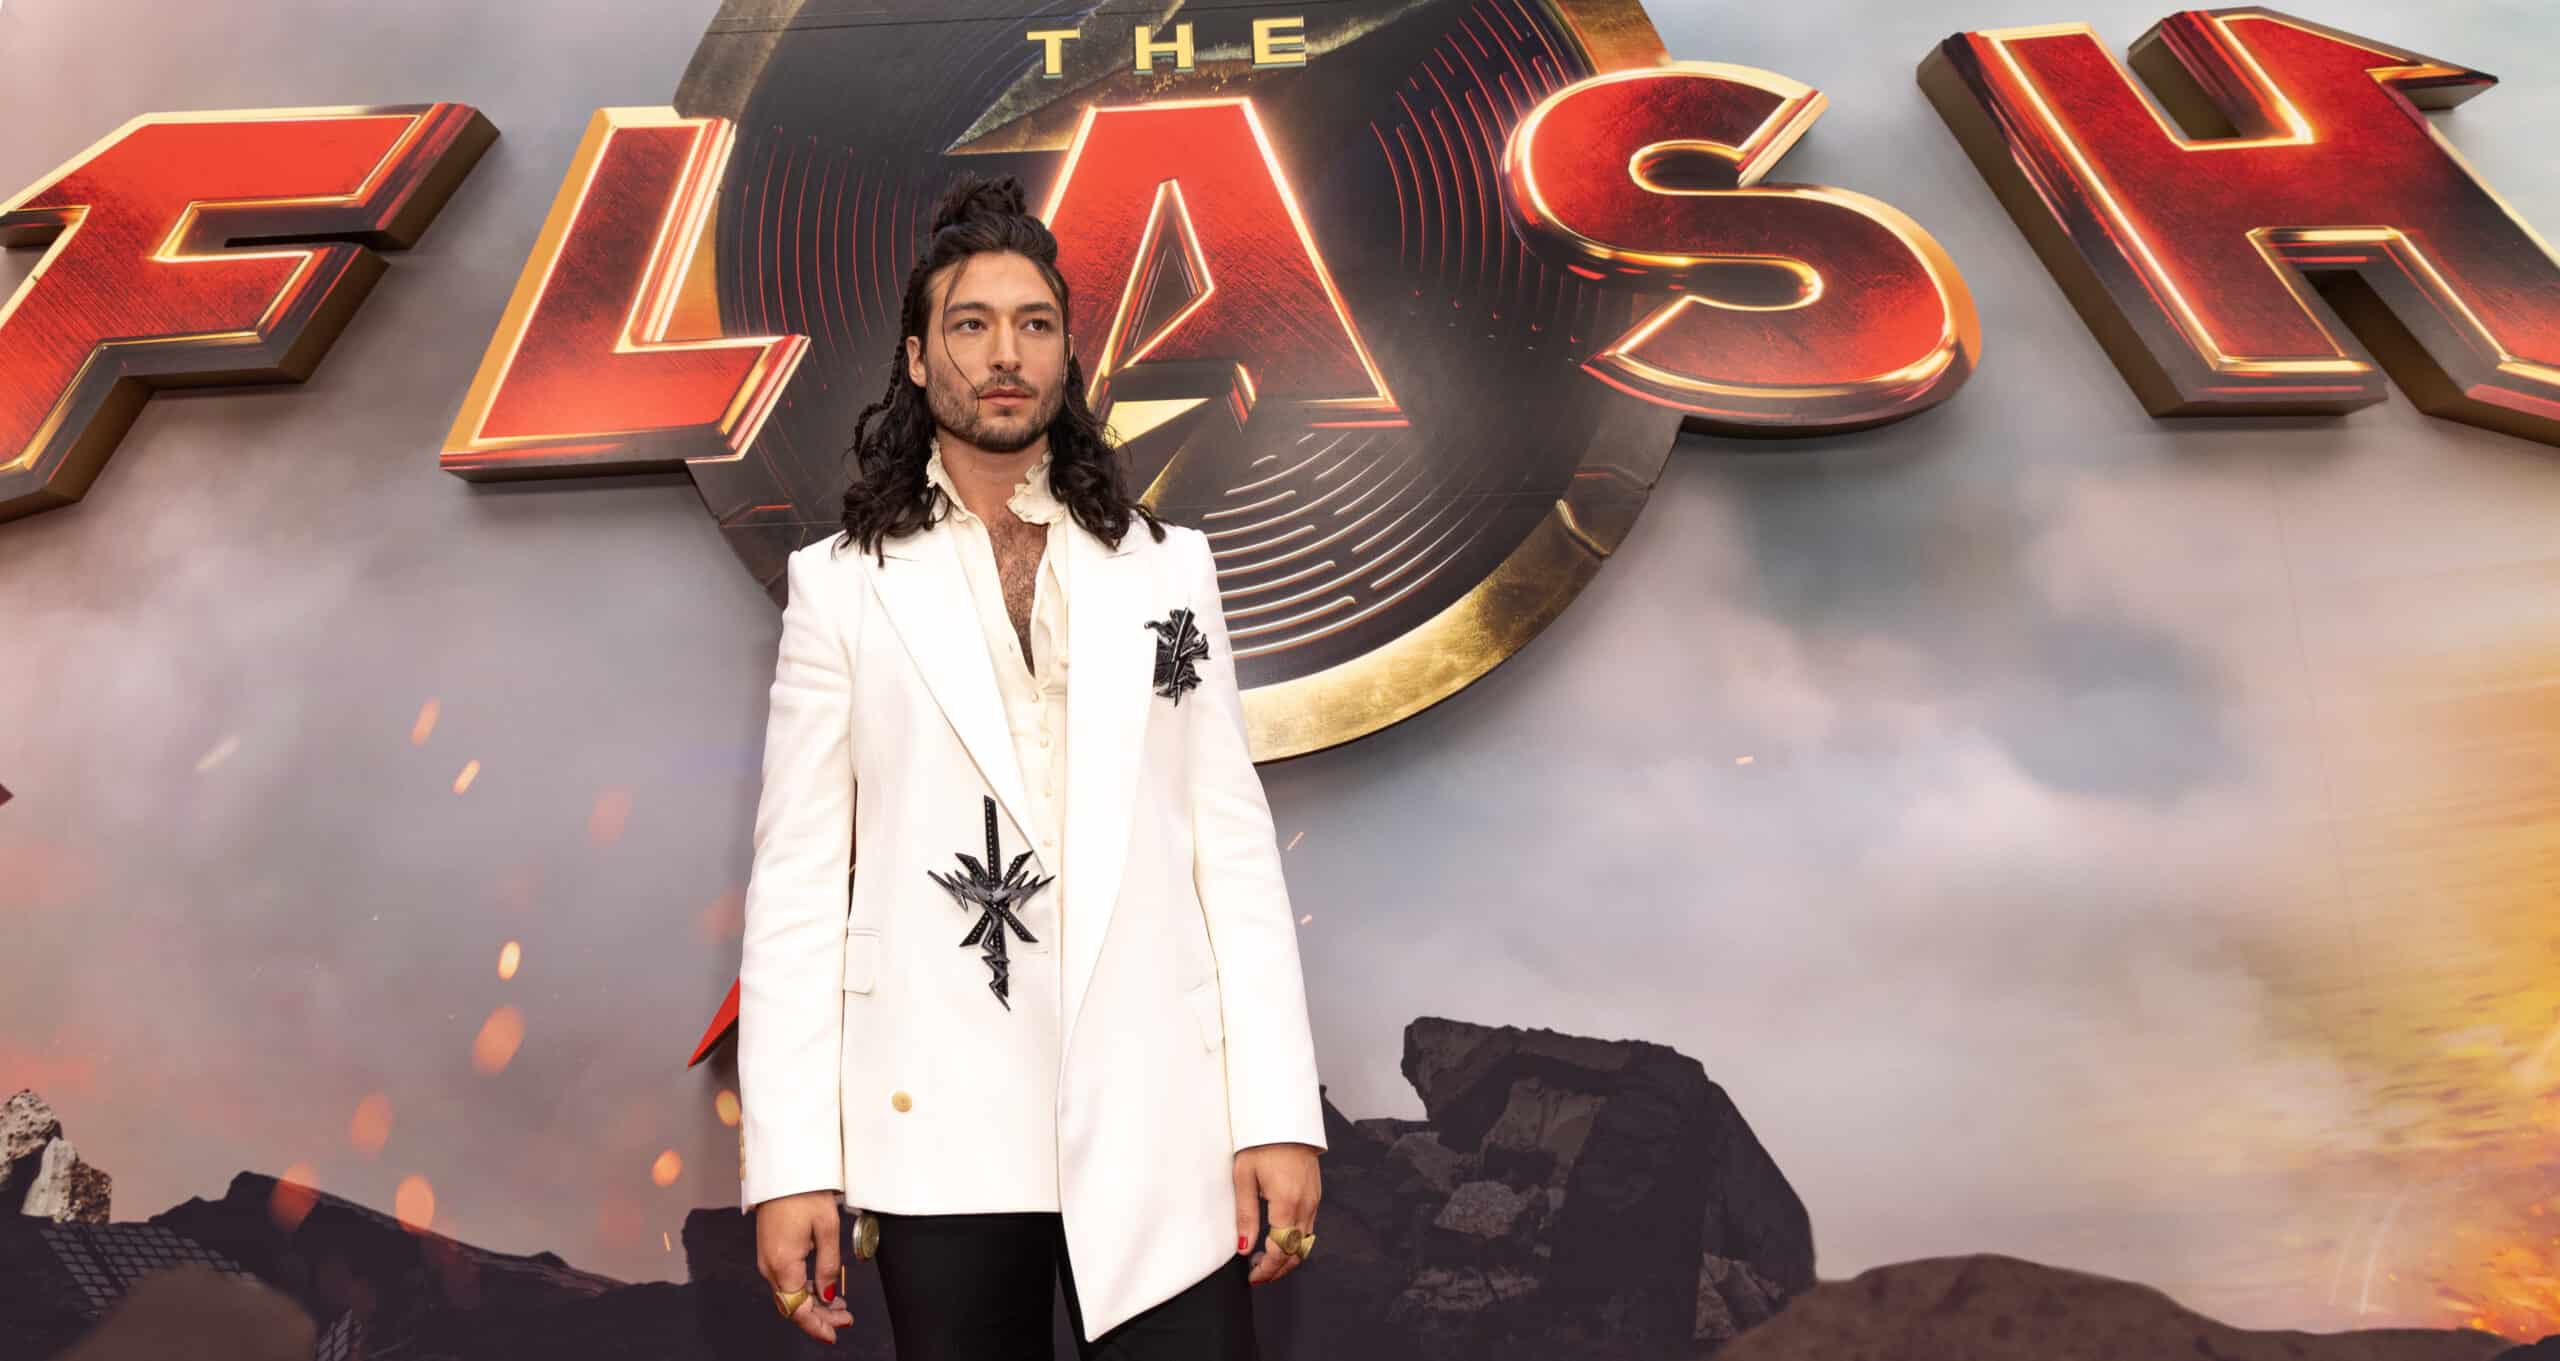 Ezra Miller at the premiere of "The Flash" held at TCL Chinese Theatre IMAX on June 12, 2023 in Los Angeles, California.